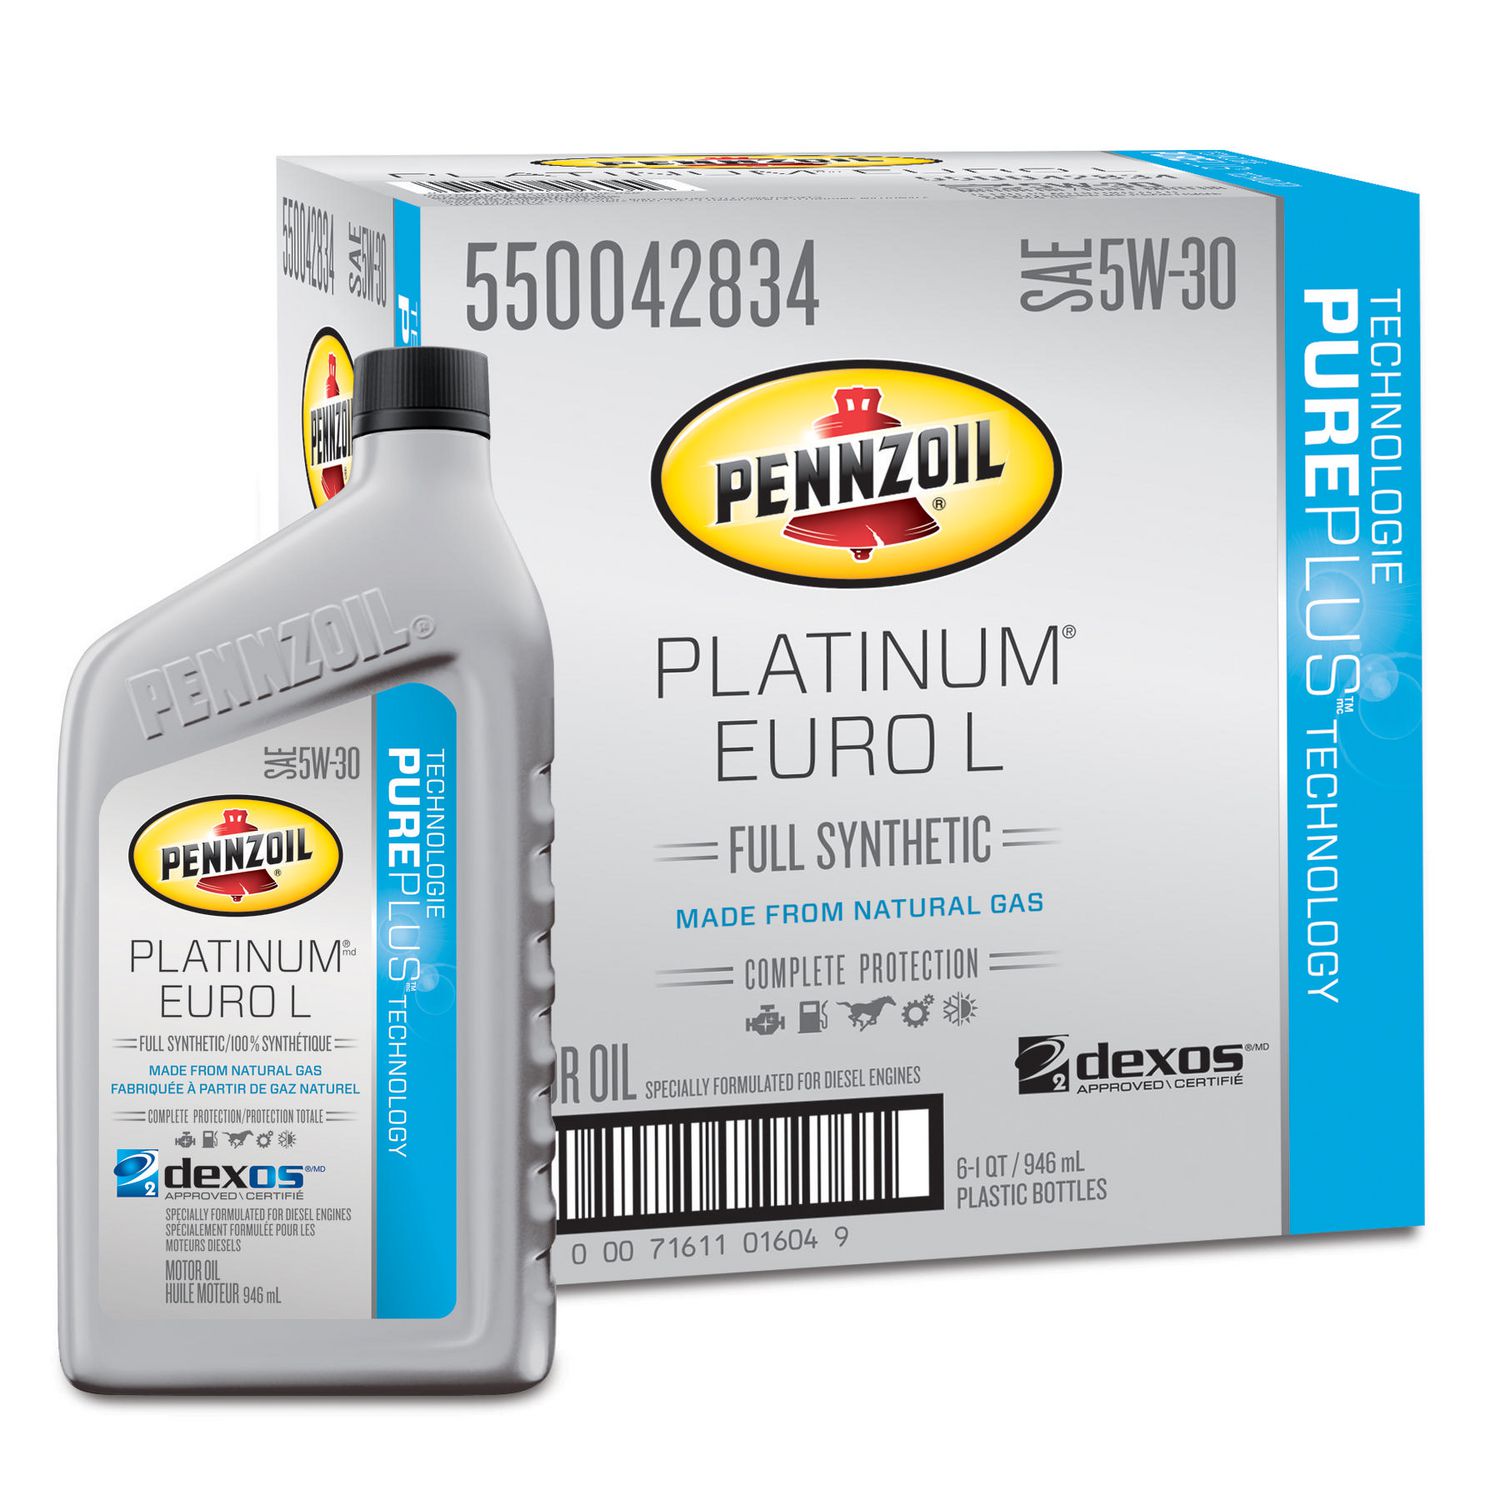 How Much Is Pennzoil Synthetic Oil